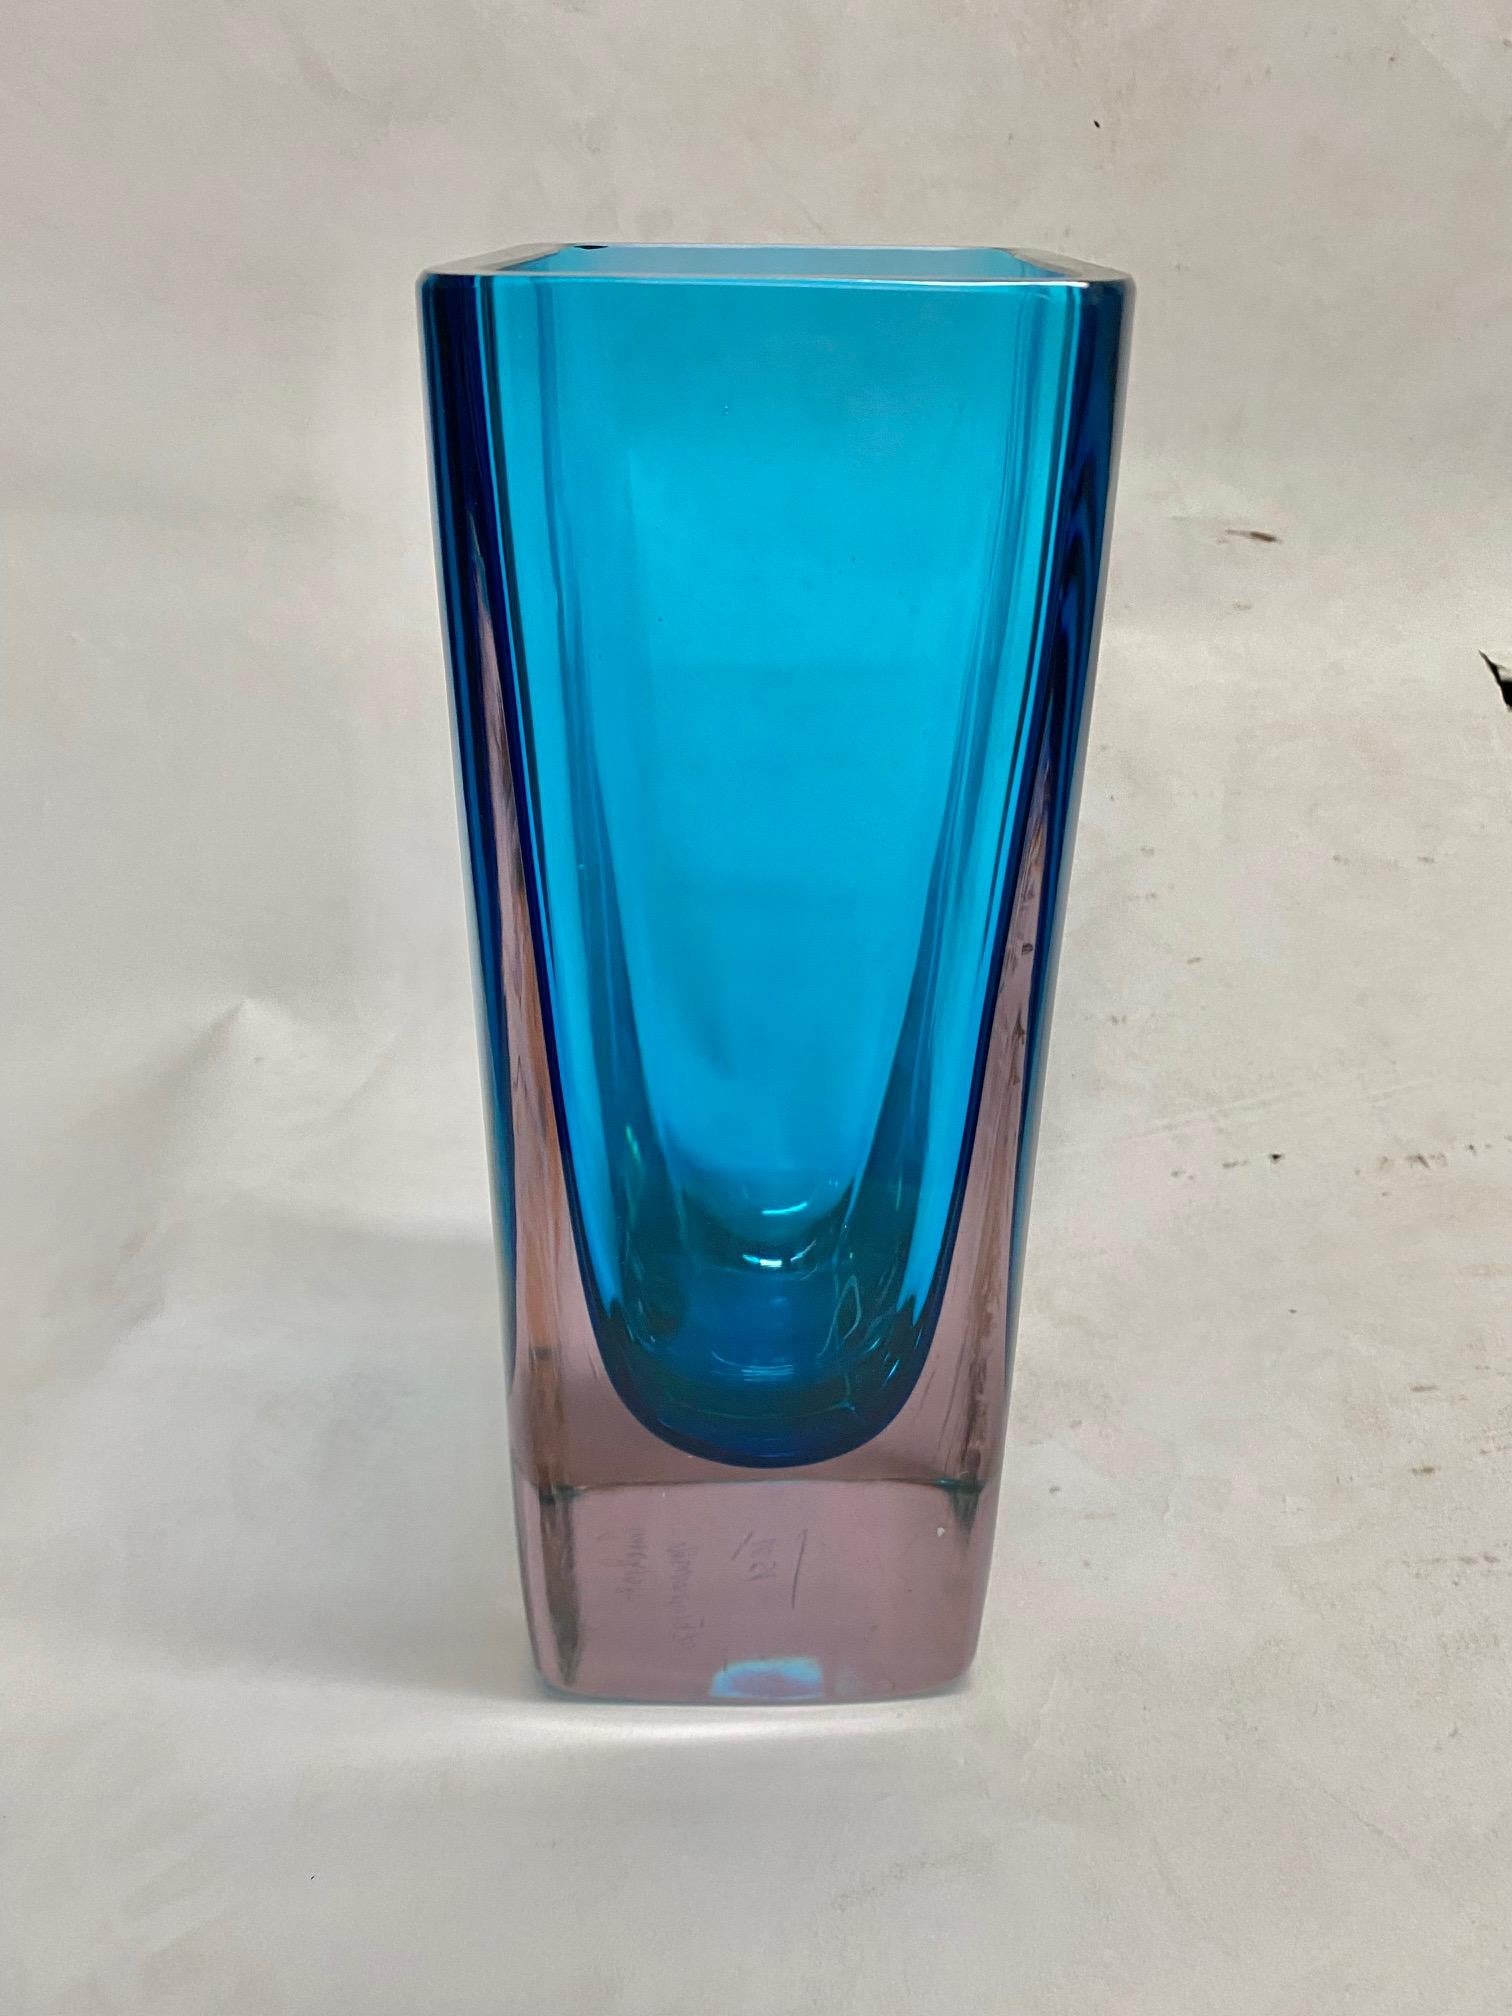 Late 20th Century Murano Blue Glass “Sommerso” Vase by Fabio Tosi for Cenedese For Sale